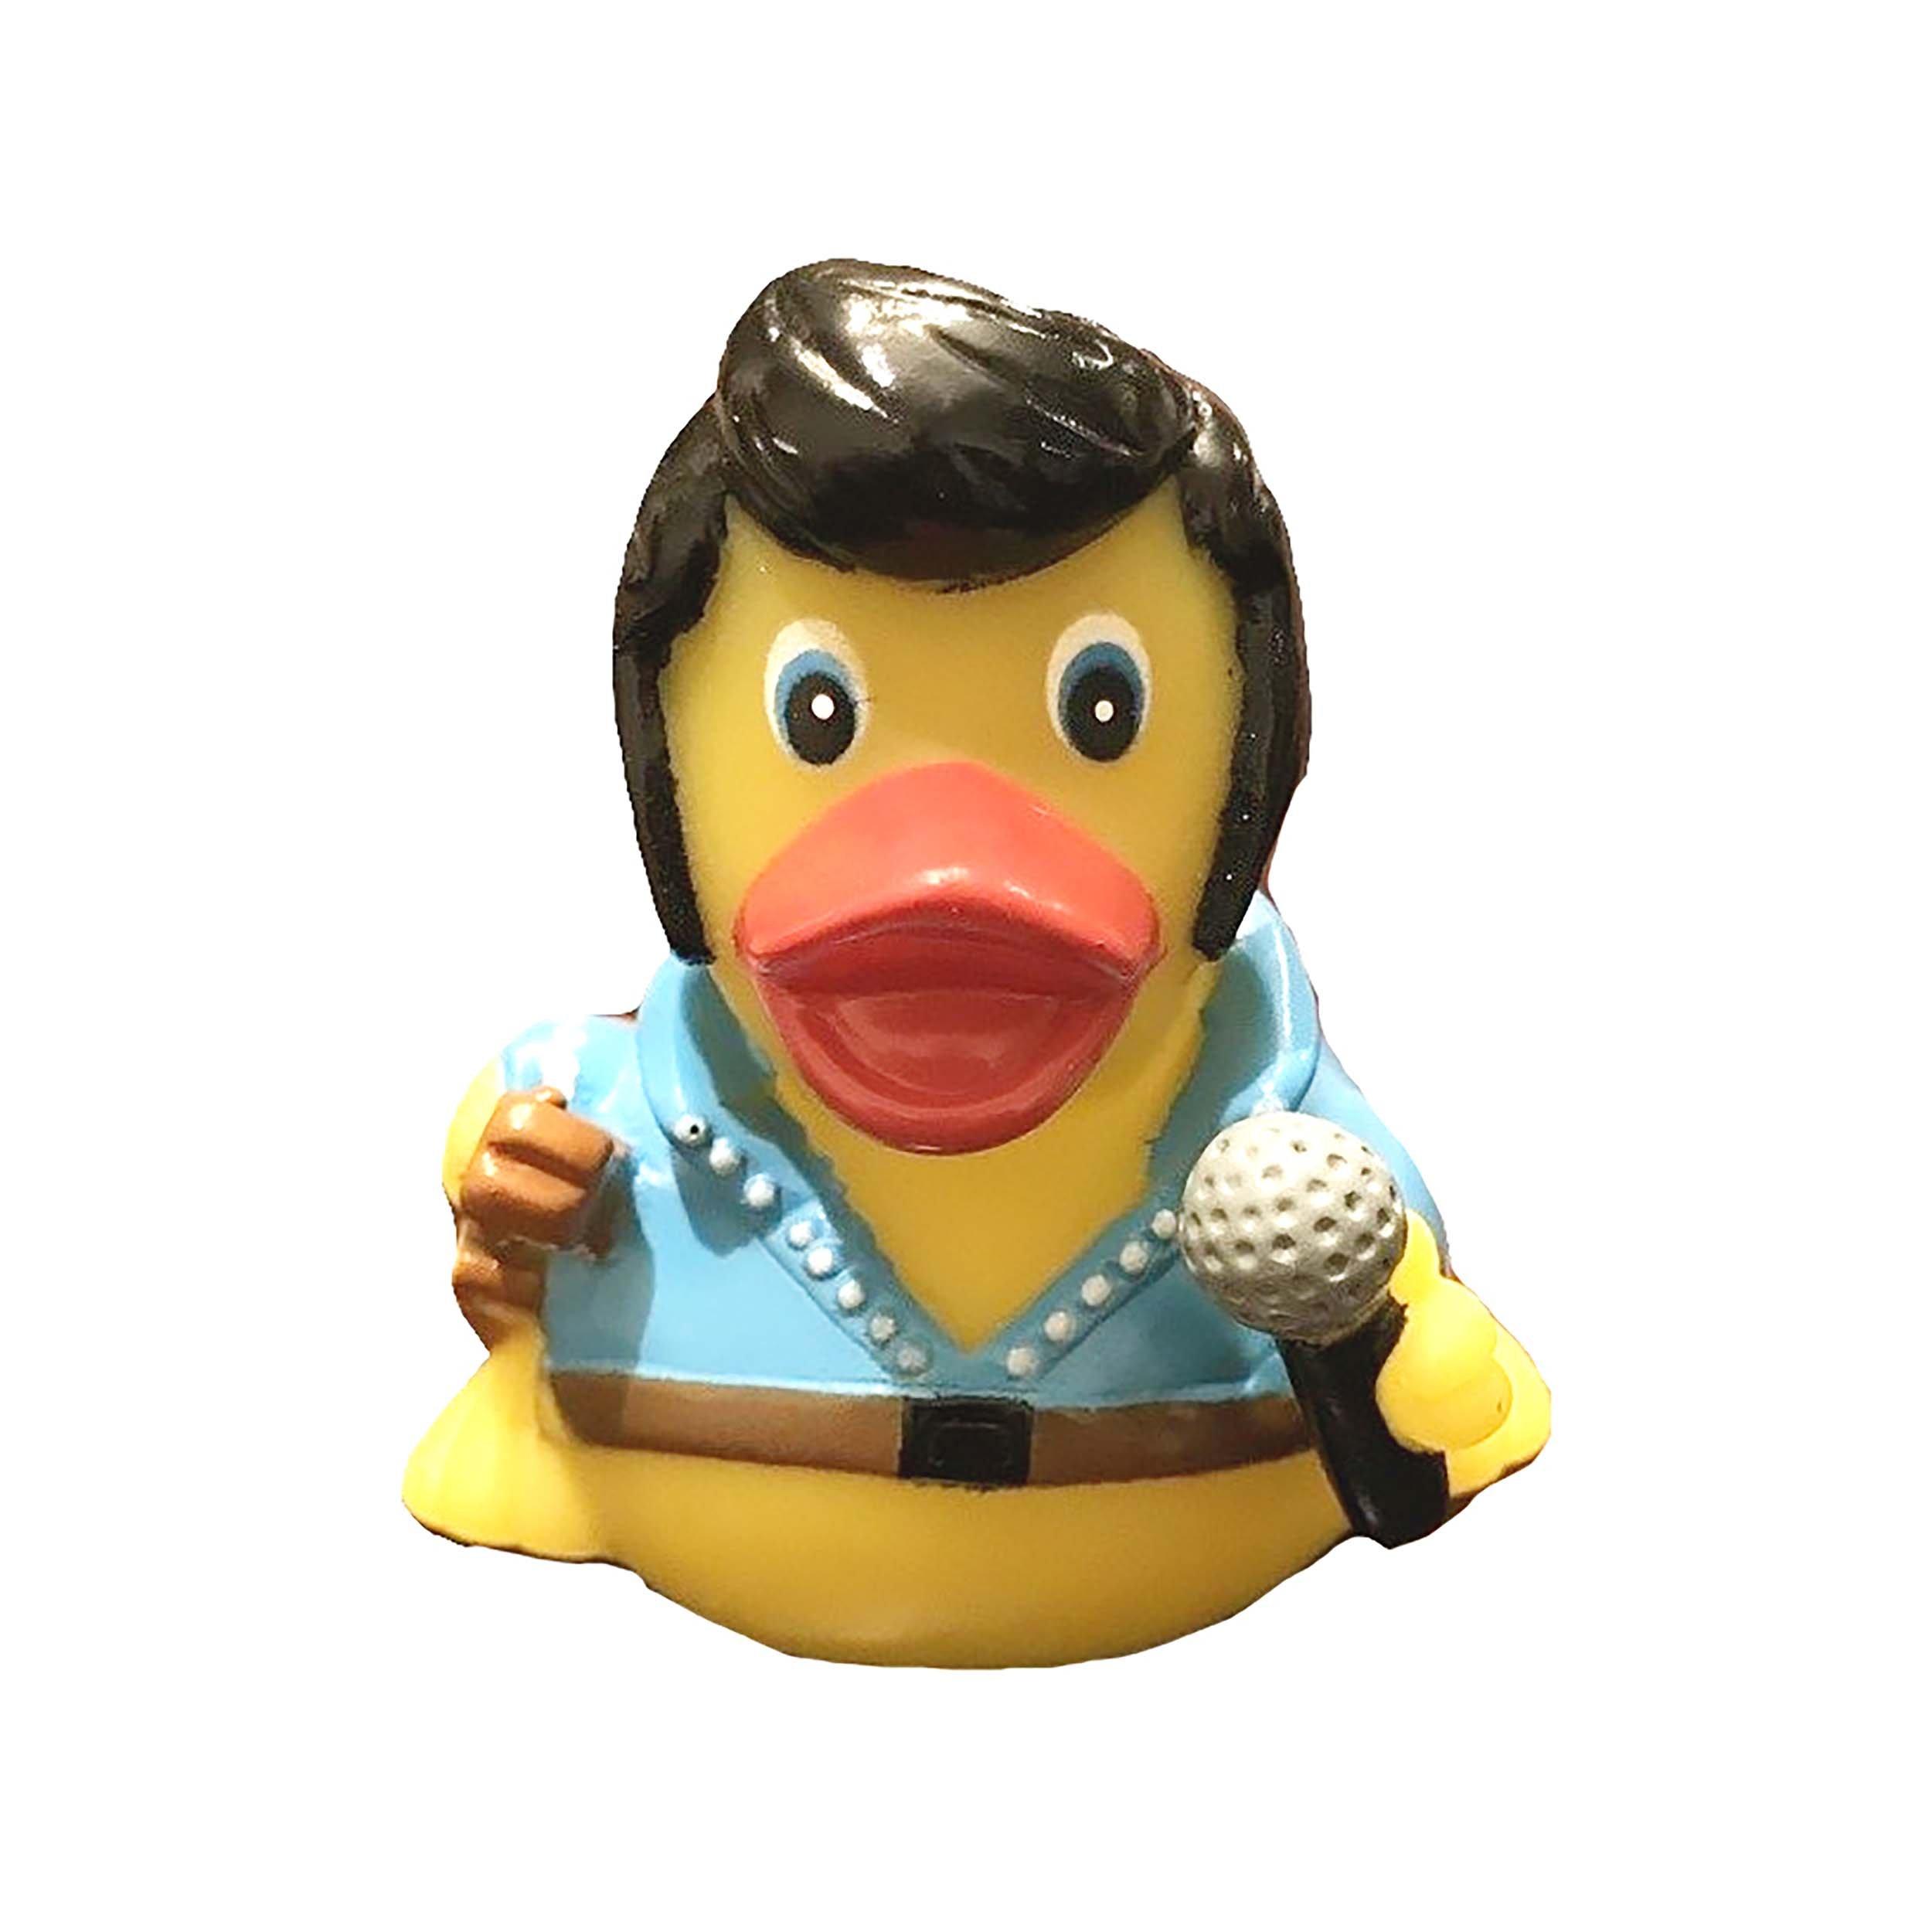 Rubber Elvis Duck- Personalized Rubber Ducks For Sale For $4.50 Only